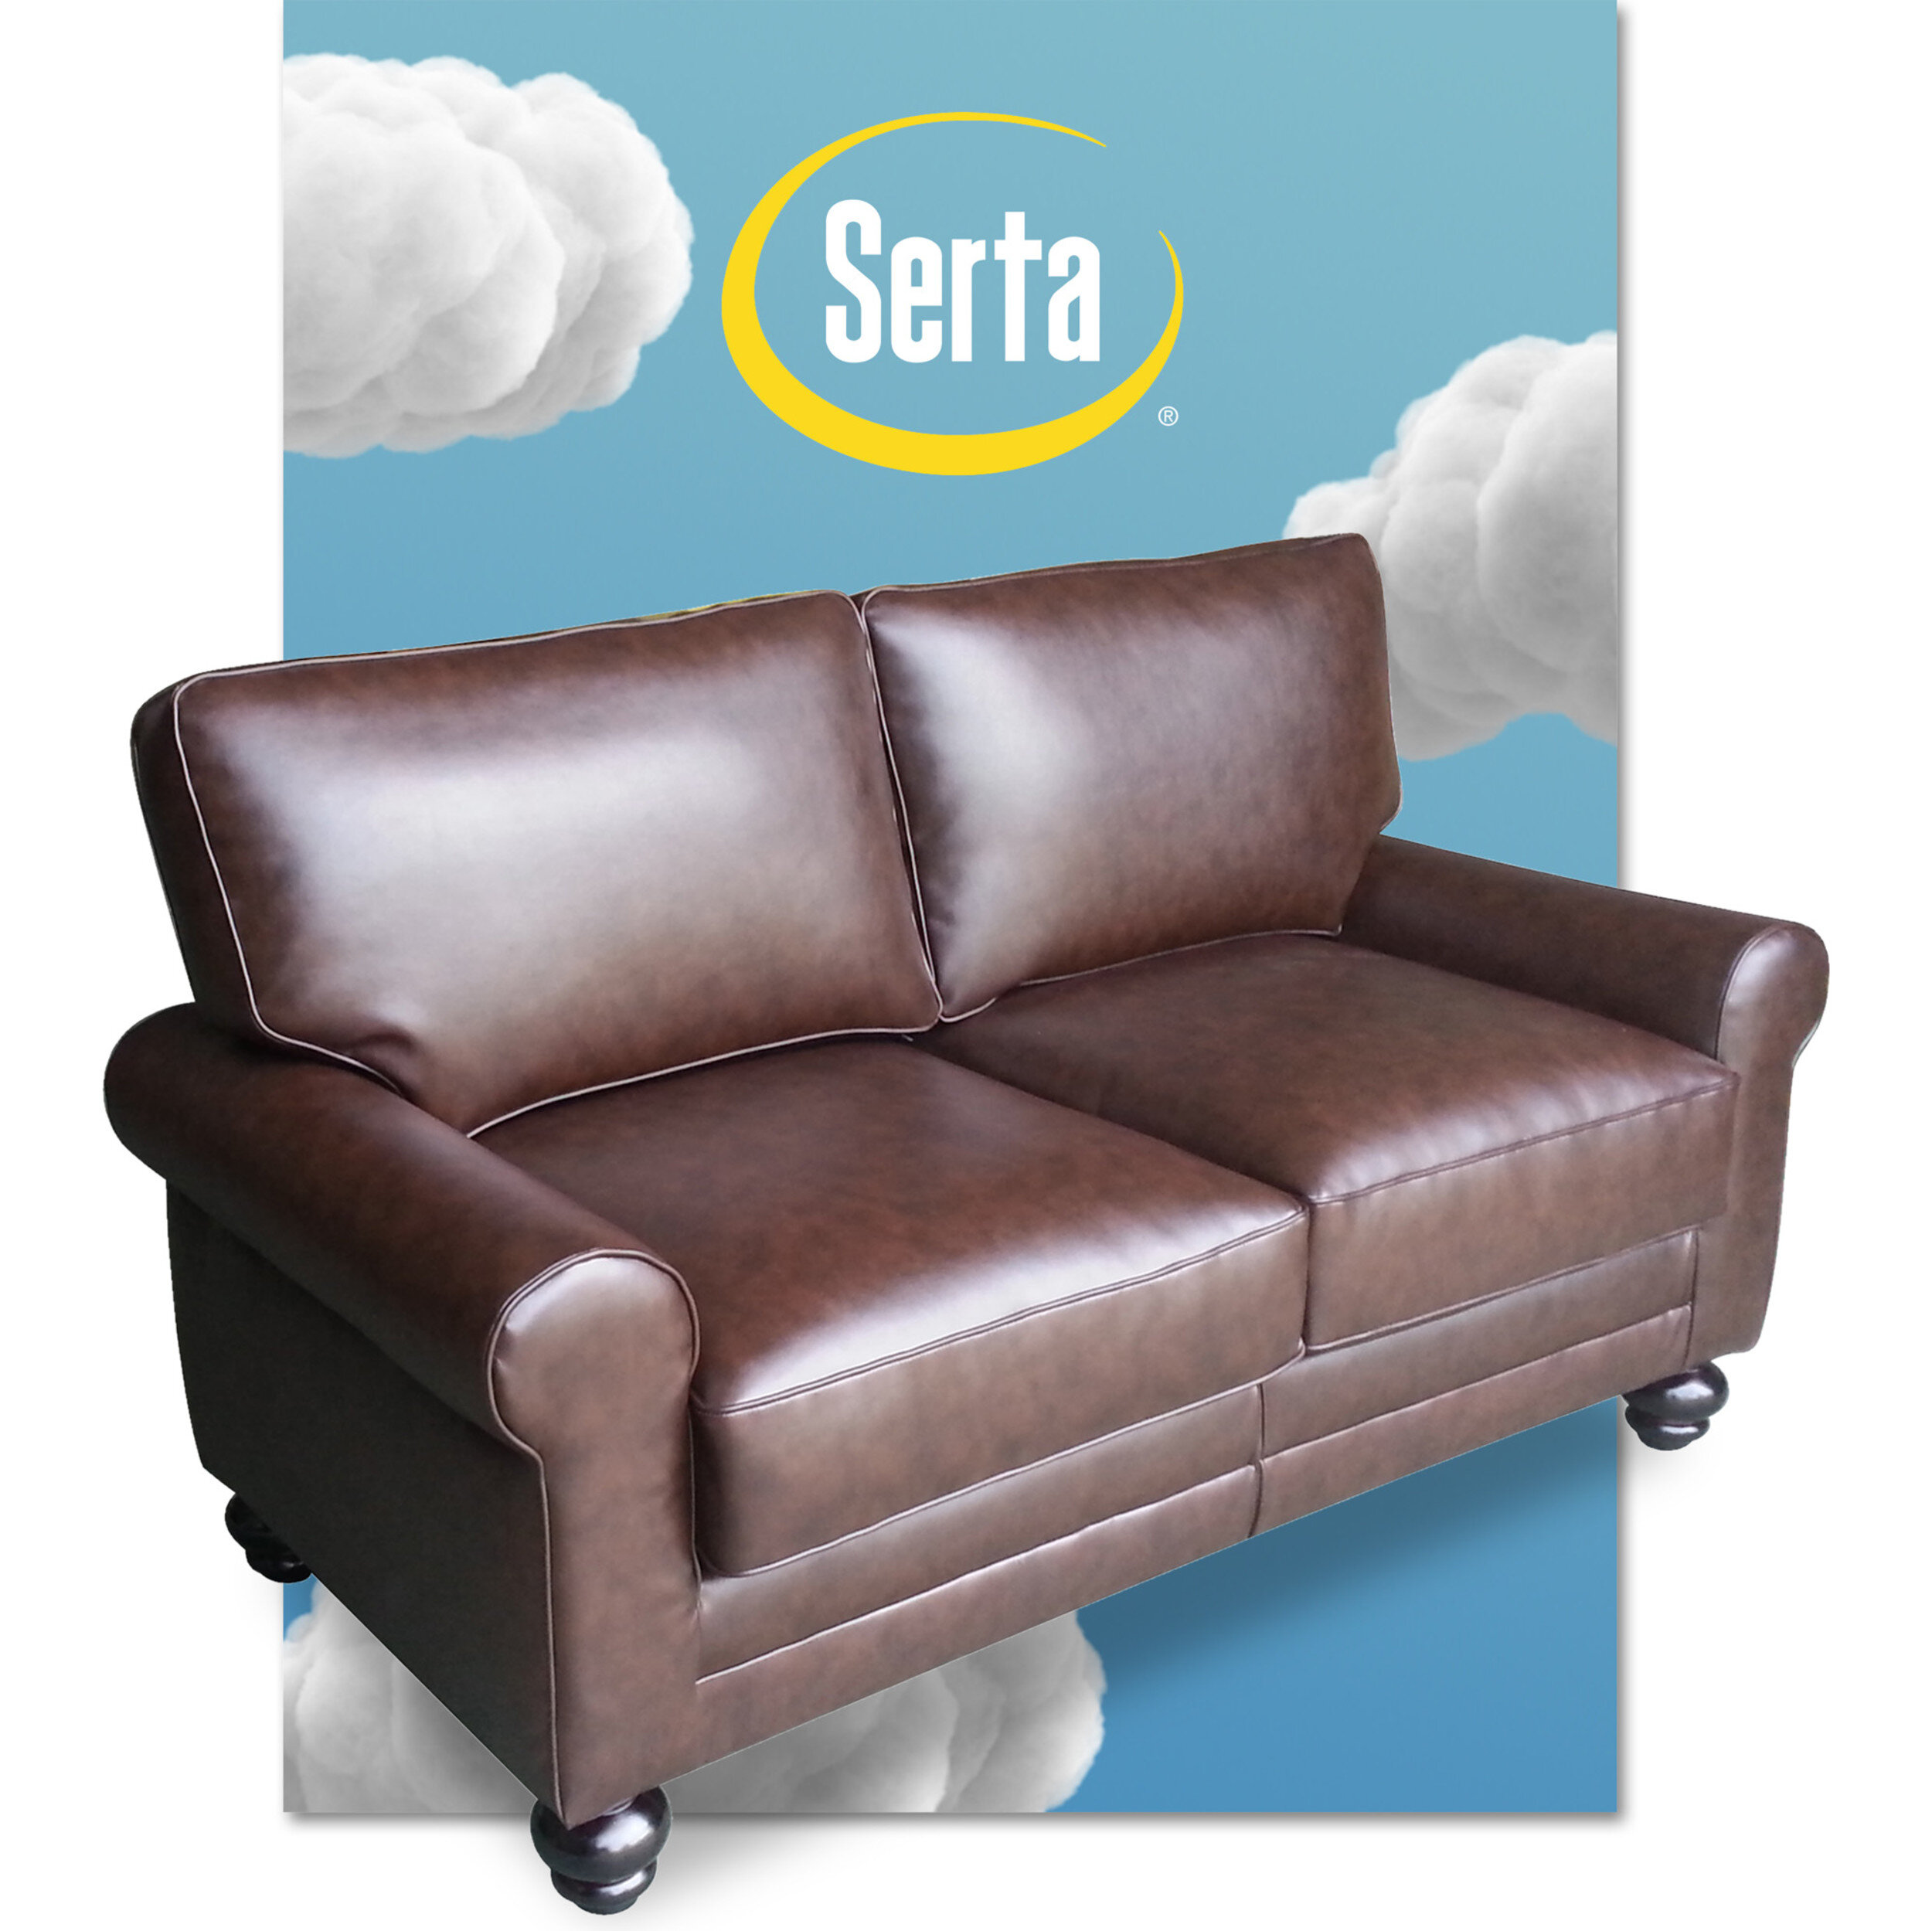 | Loveseat Home Serta Two Rounded for People, Serta at Pillowed Reviews Wayfair 61\